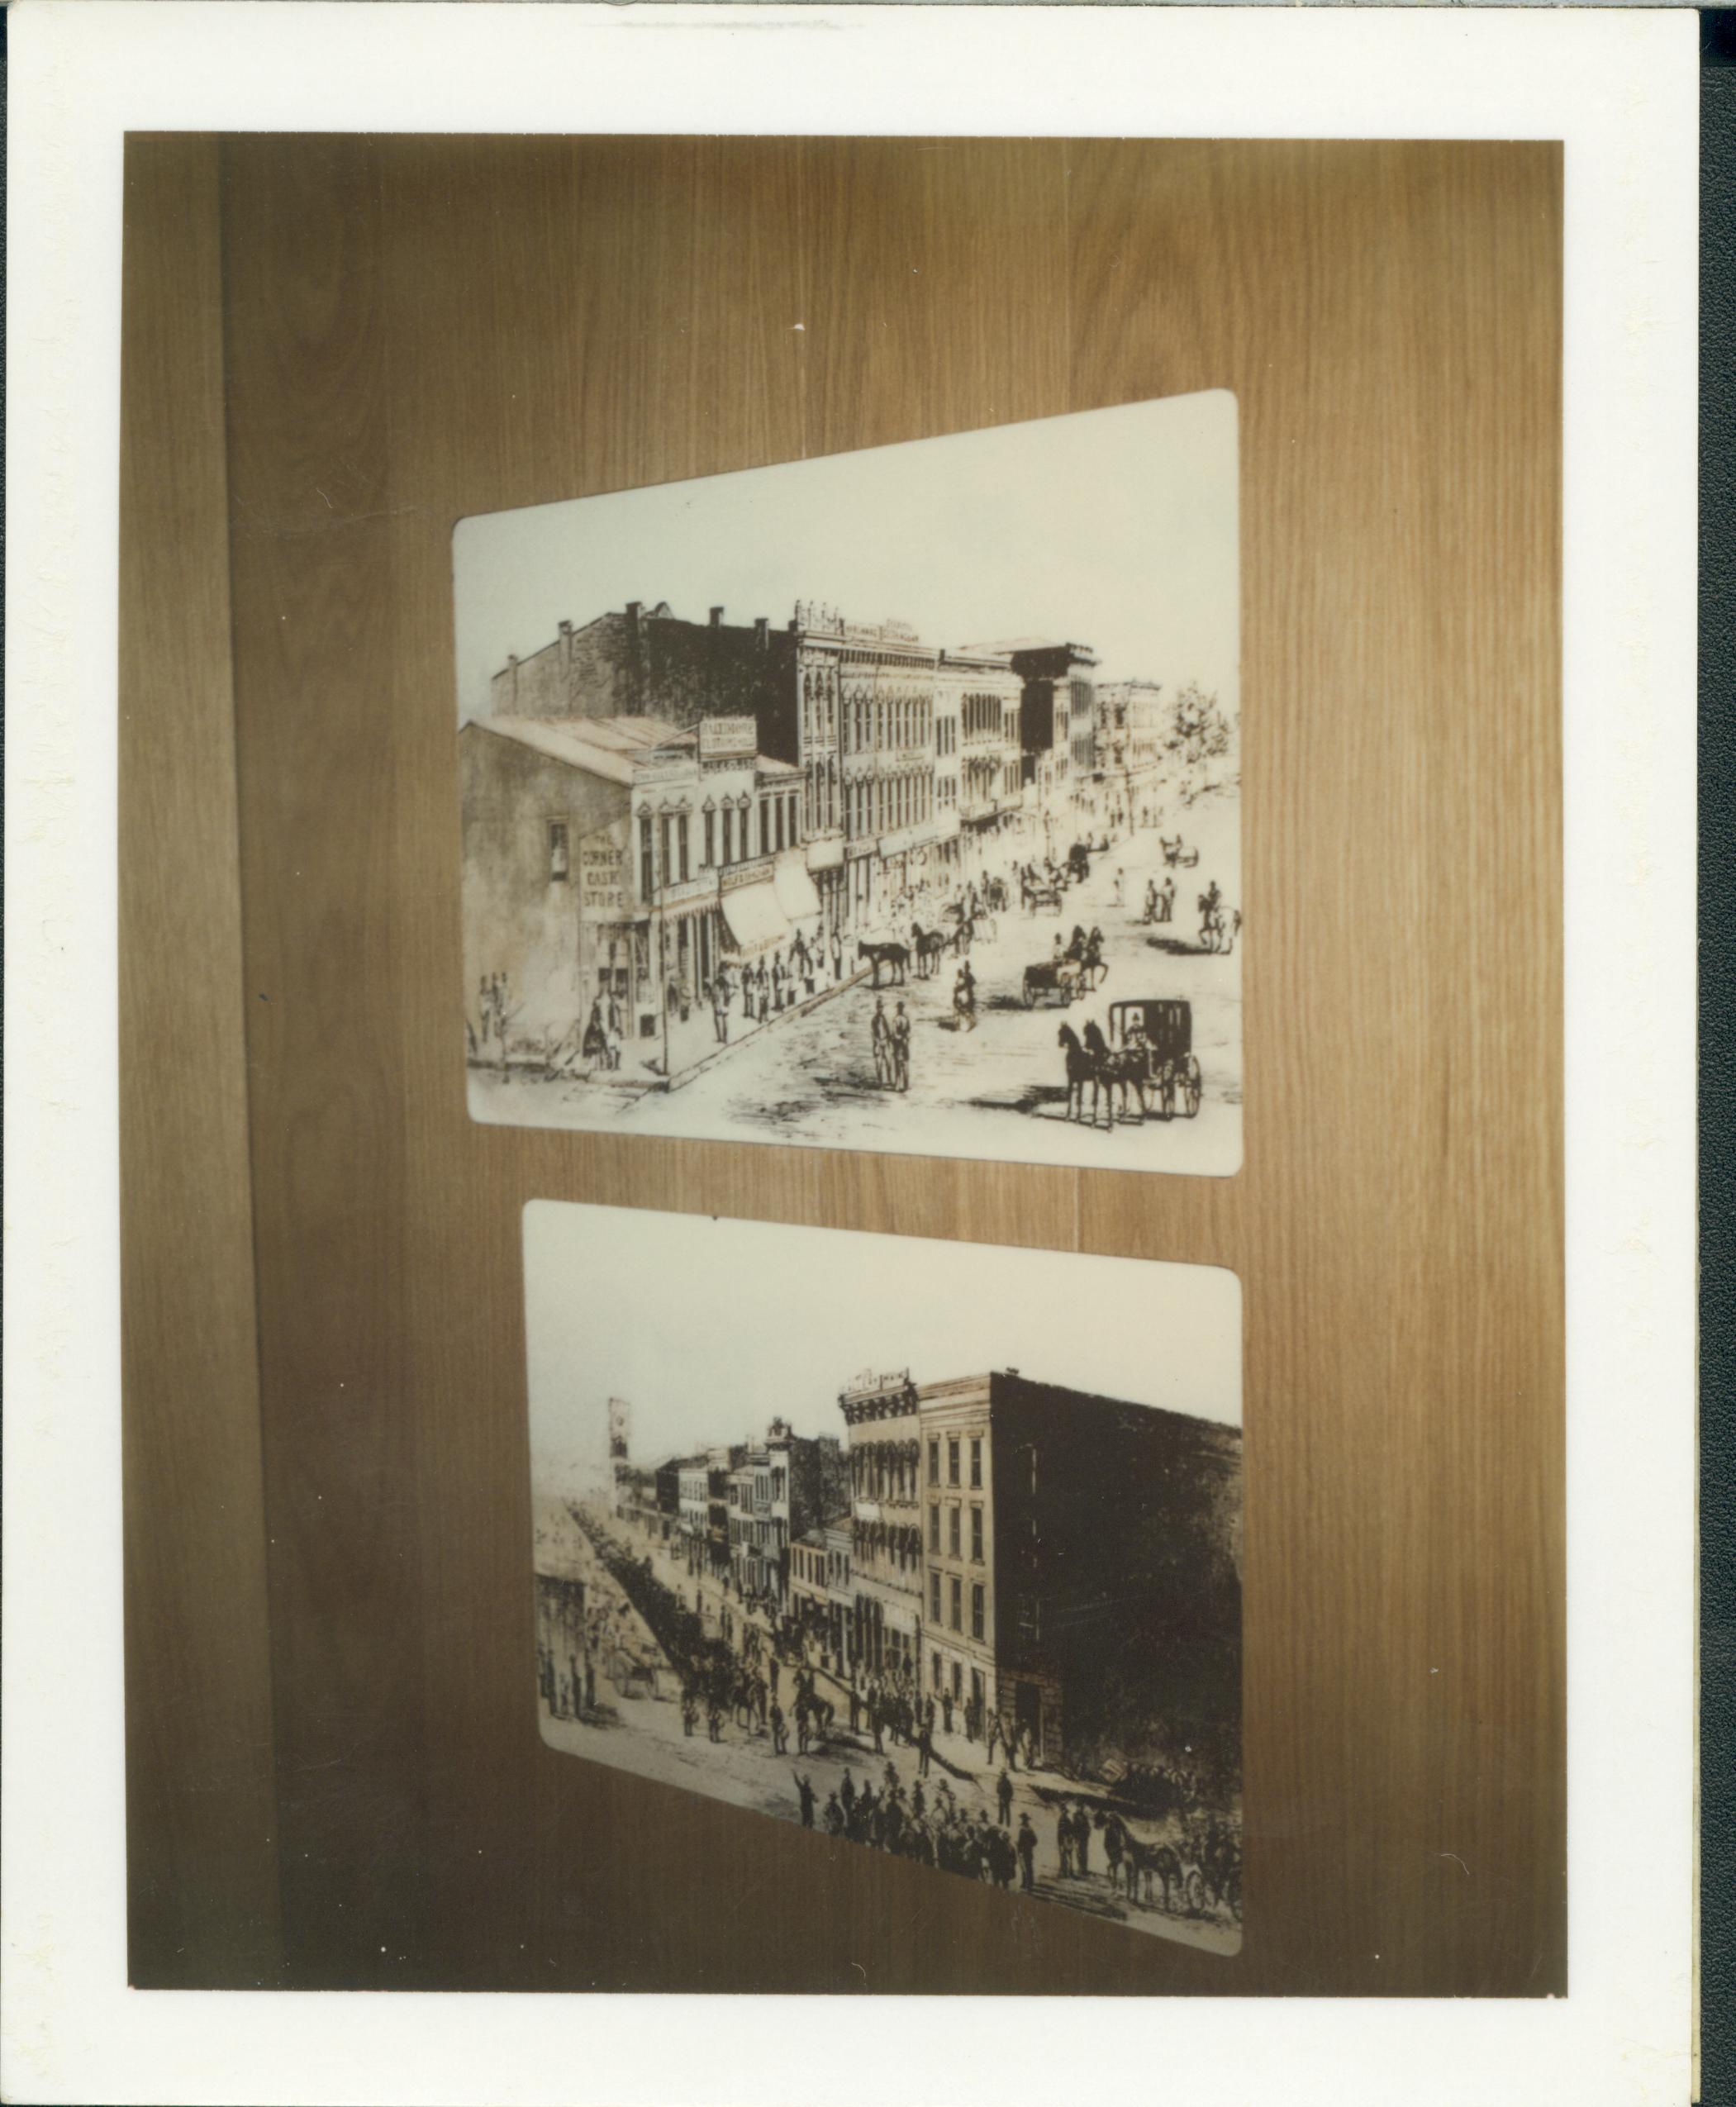 top: north side of square between 5th and 6th on Washington Street, bottom: south side of square between 5th and 6th on Adams Lincoln Home NHS, class 13, pic 10, 7 display, square, Washington and Adams Street